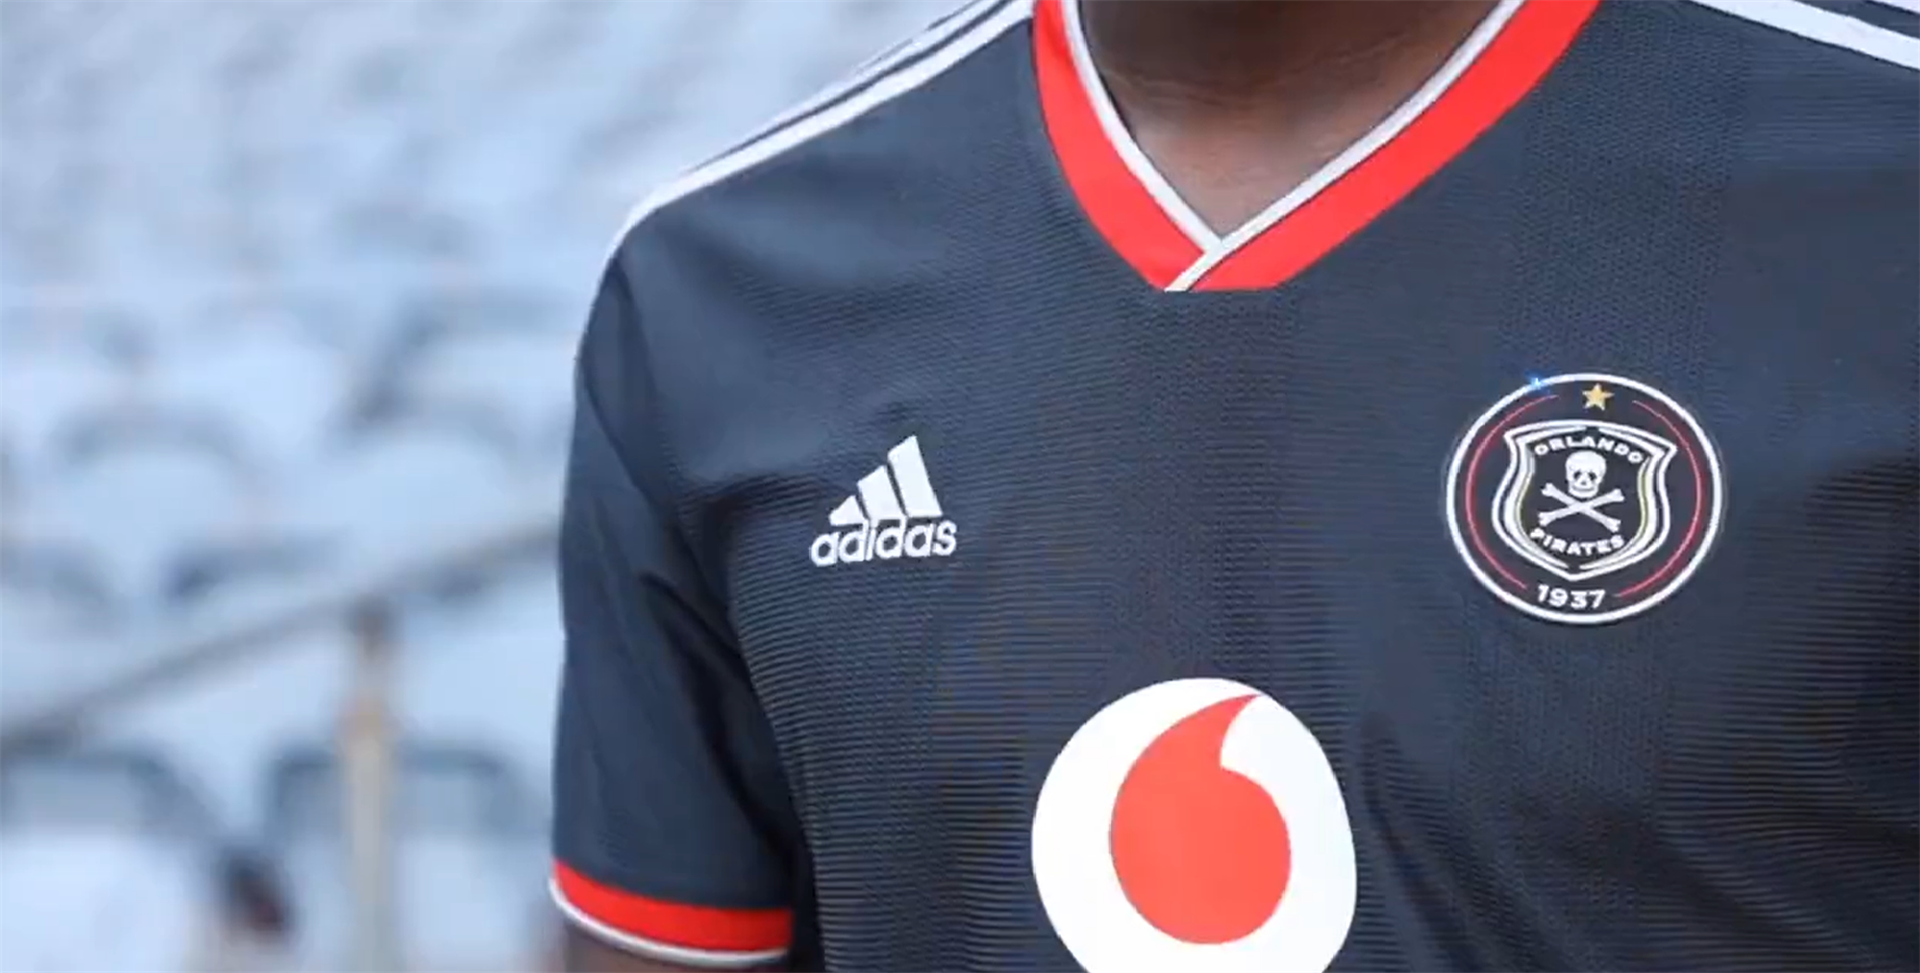 Scroll through the gallery to see Orlando Pirates'